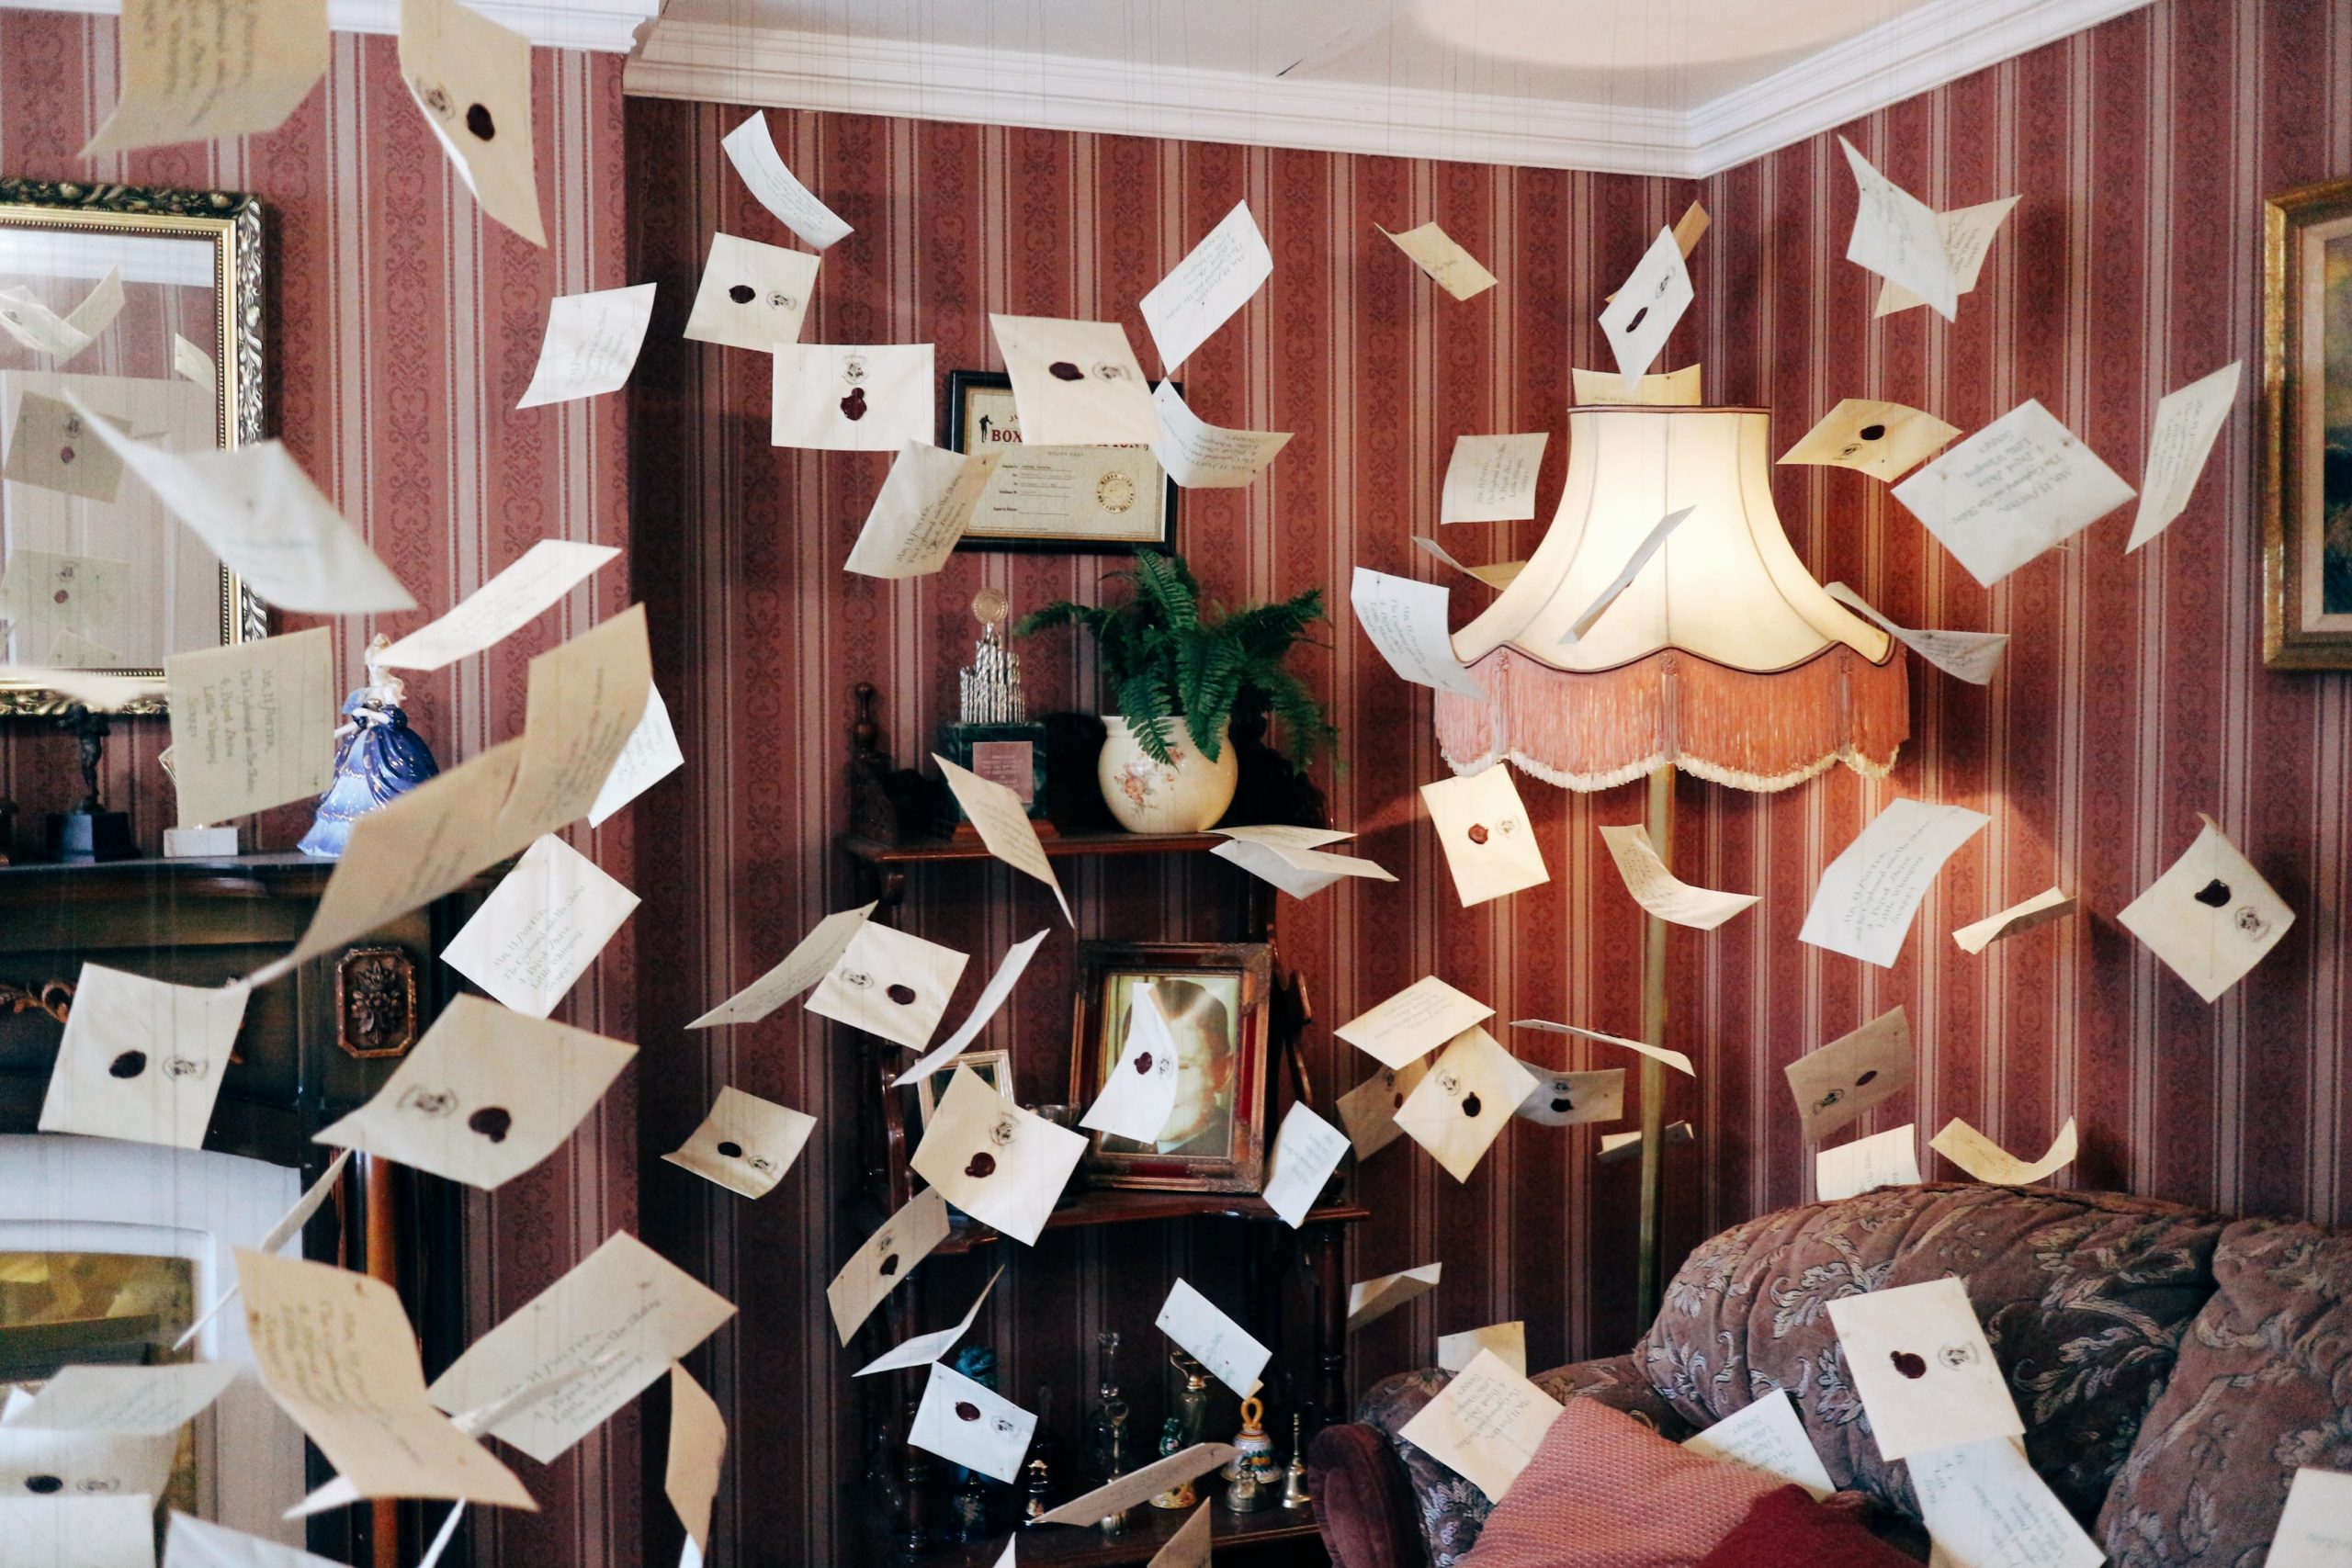 Letters fly through the fireplace of a living room in a scene recreated from Harry Potter courtesy of Warner Bros. Studio Tour.